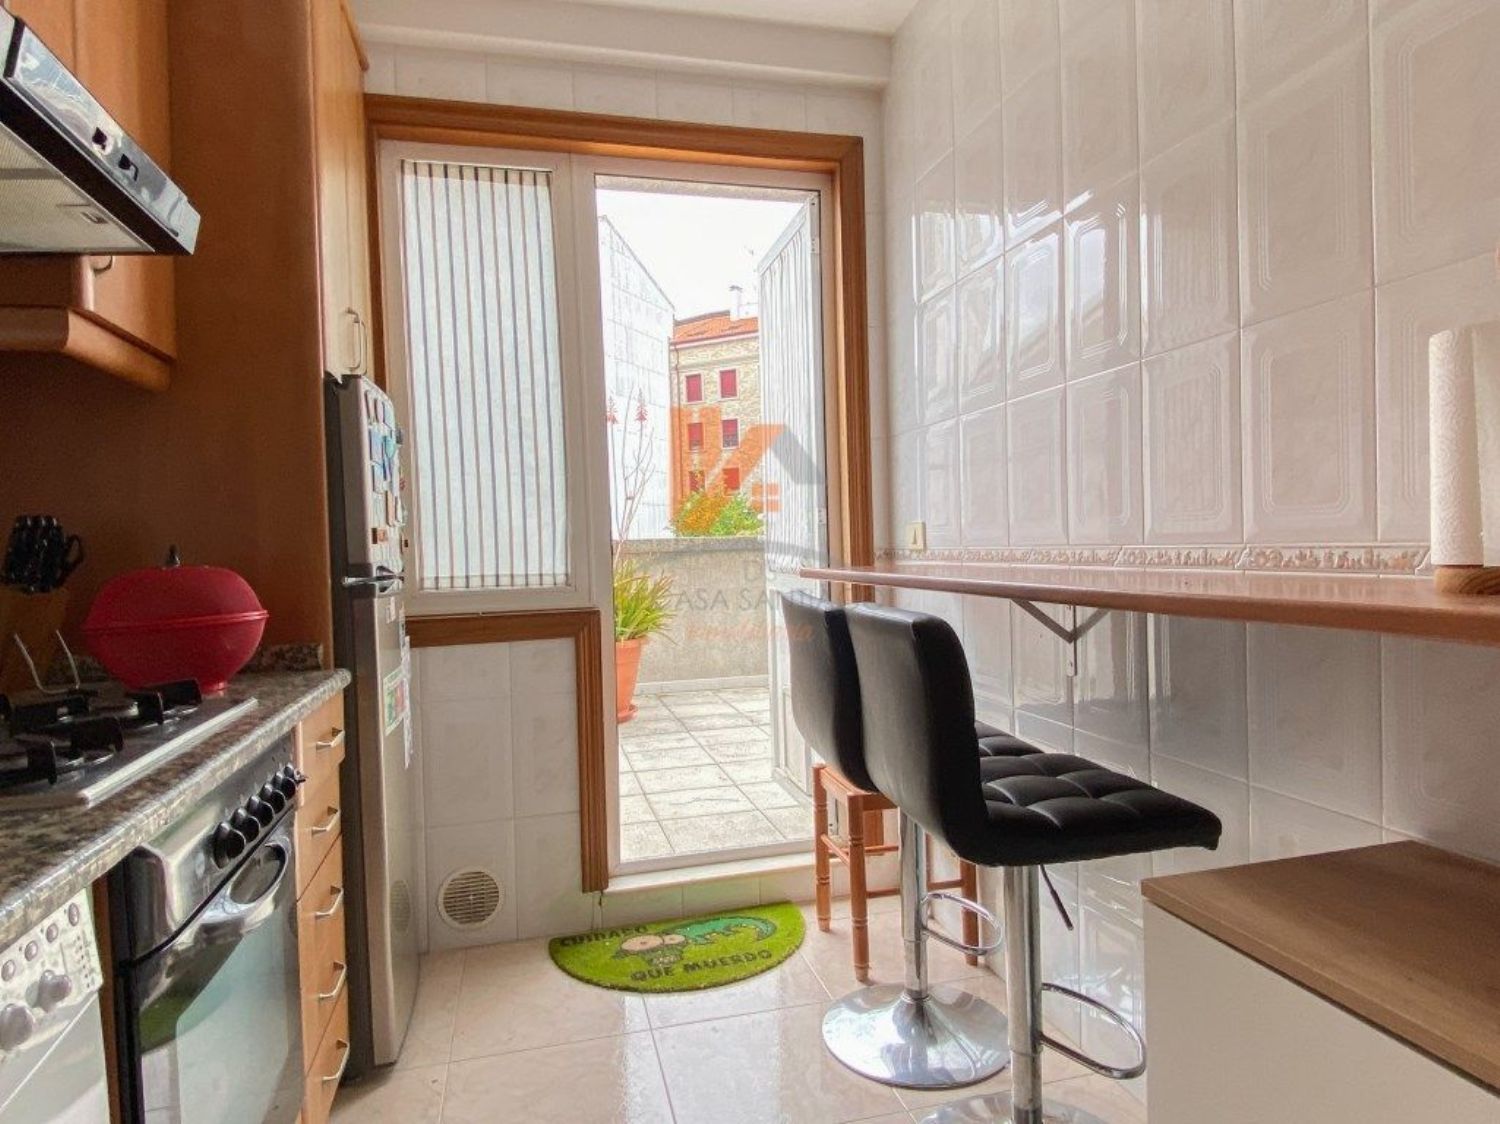 Apartment for sale on the seafront on Calle Ram,bla in Porto do Son